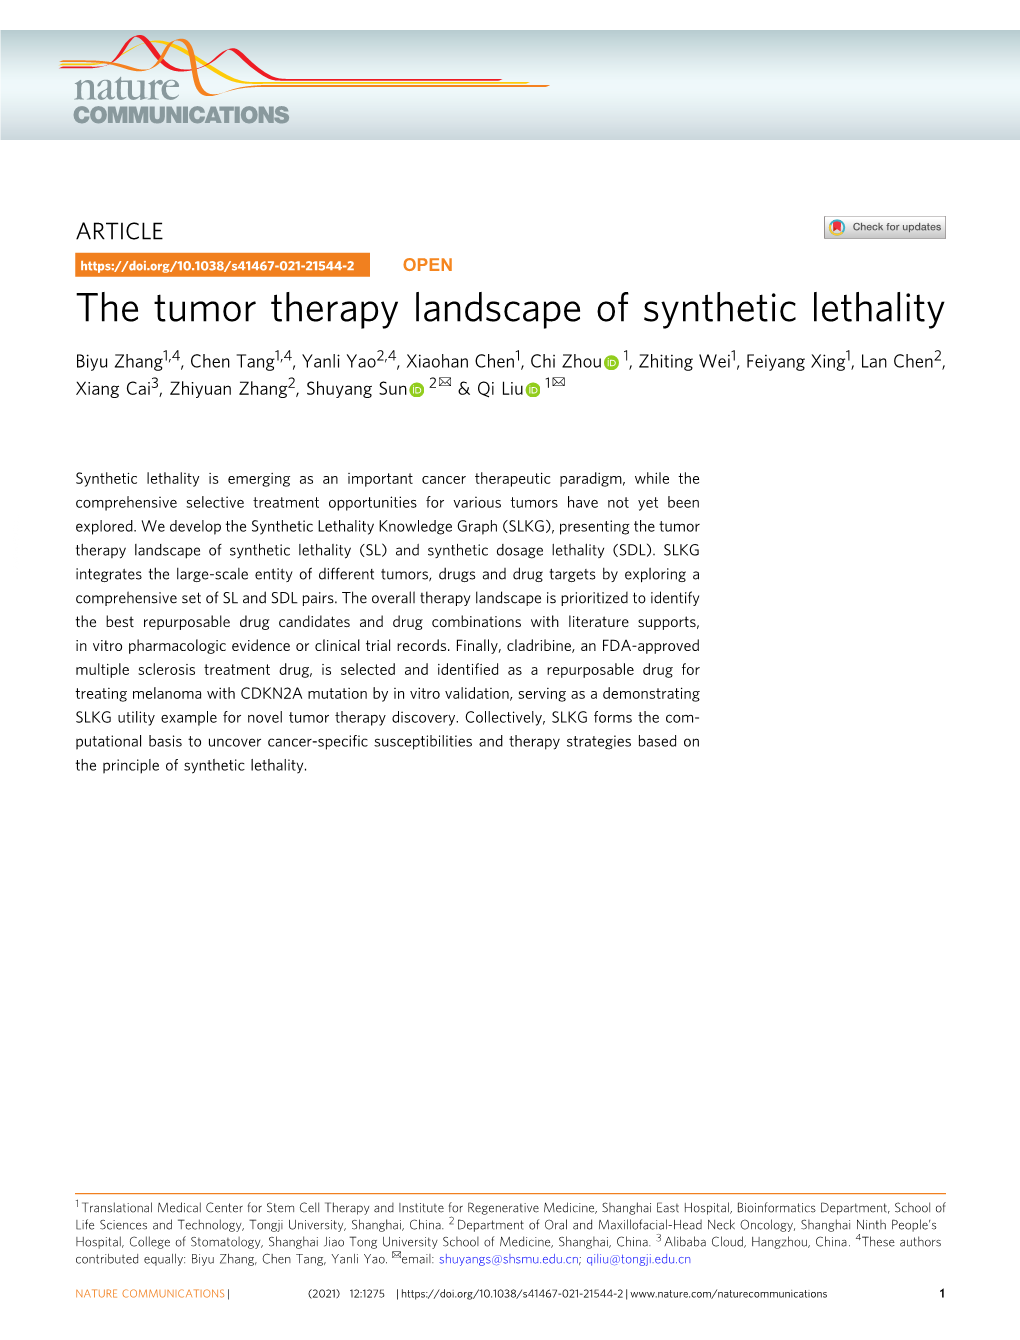 The Tumor Therapy Landscape of Synthetic Lethality